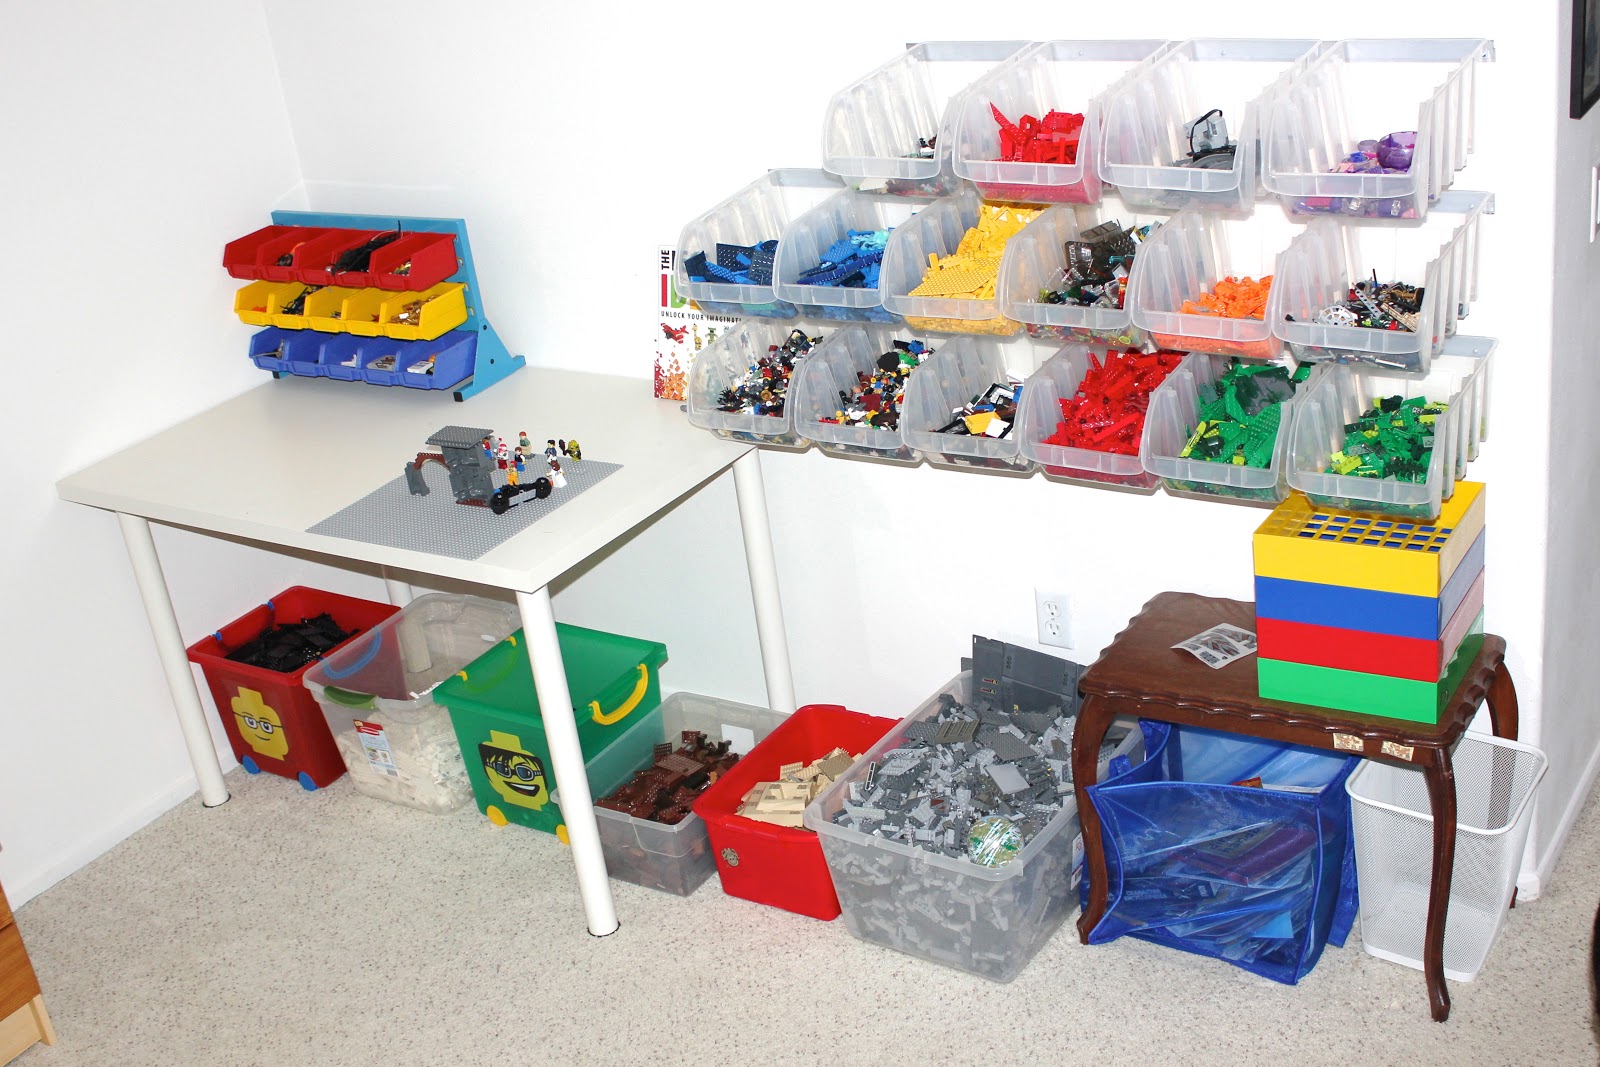 33 Lego Storage Ideas to Save Your Sanity - The Handyman's Daughter